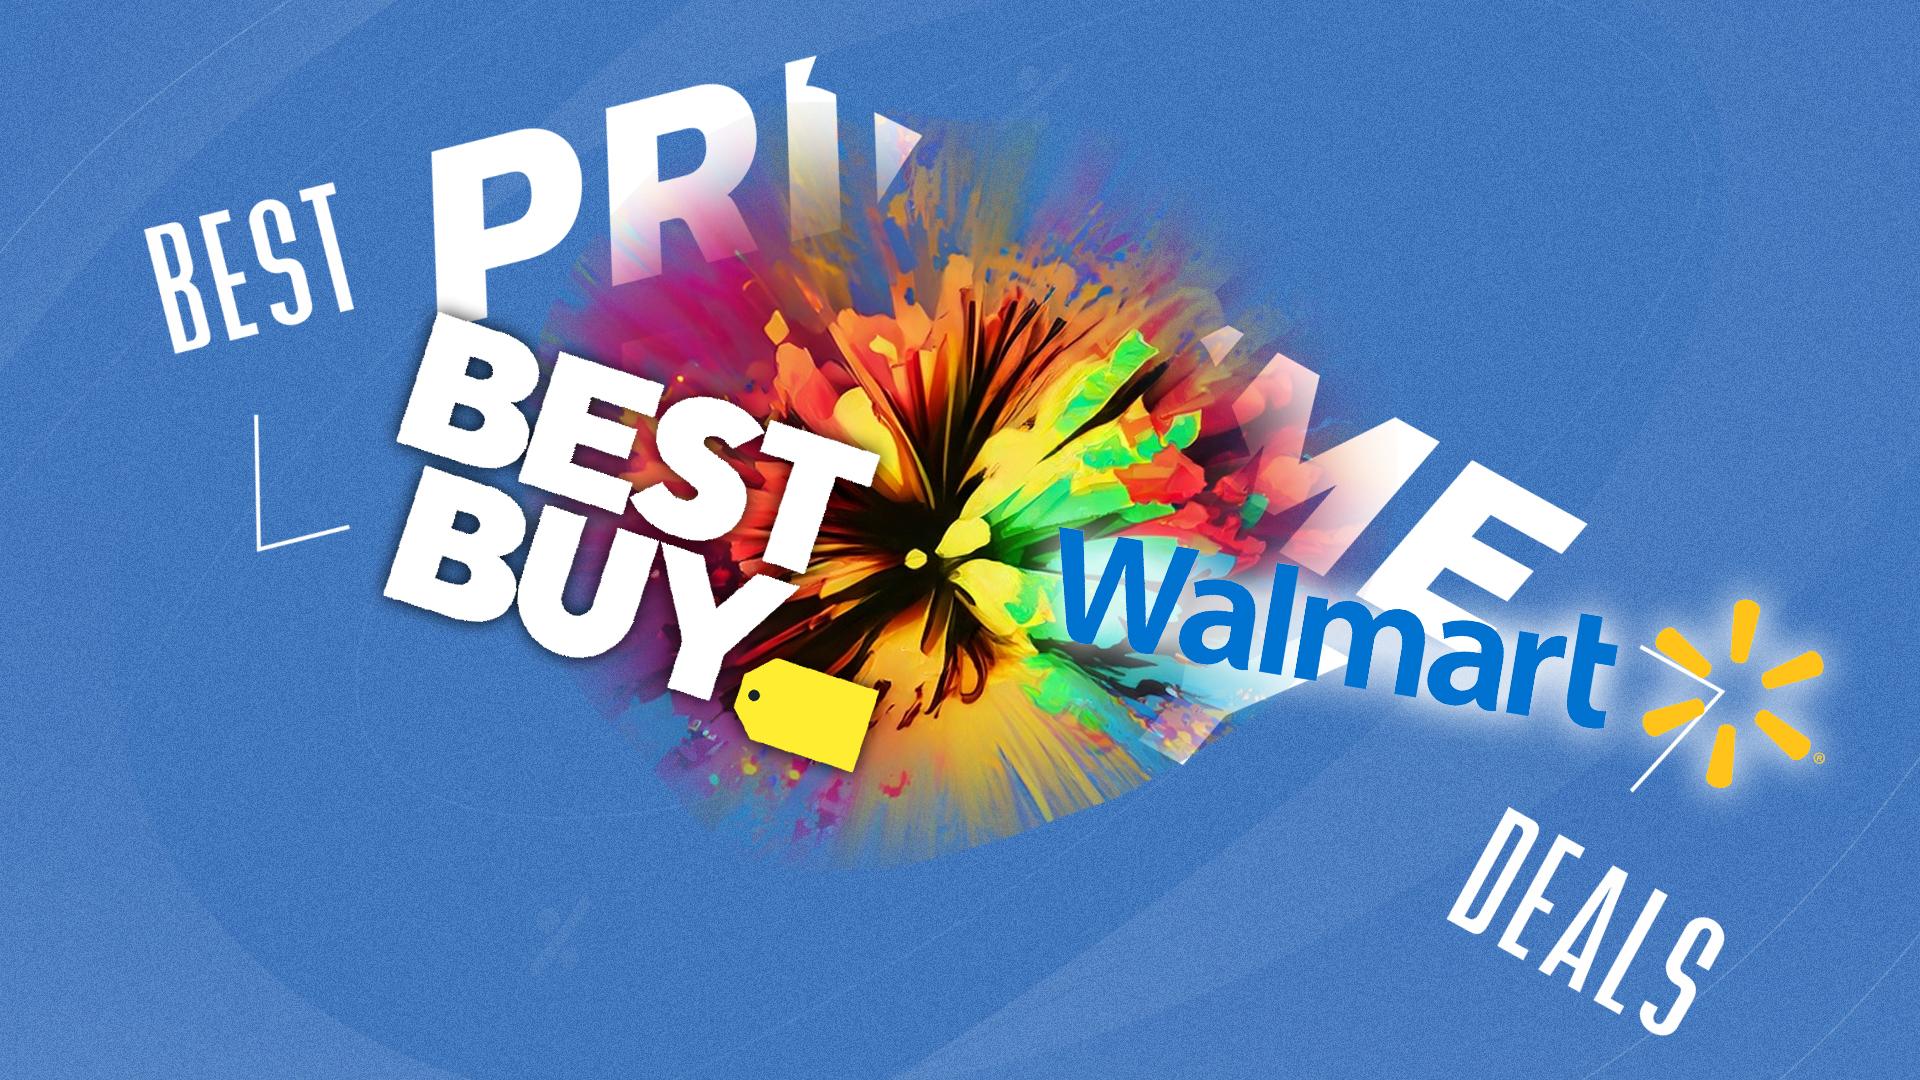 Prime Day deals exploding with the best buy and walmart logos bursting out of it